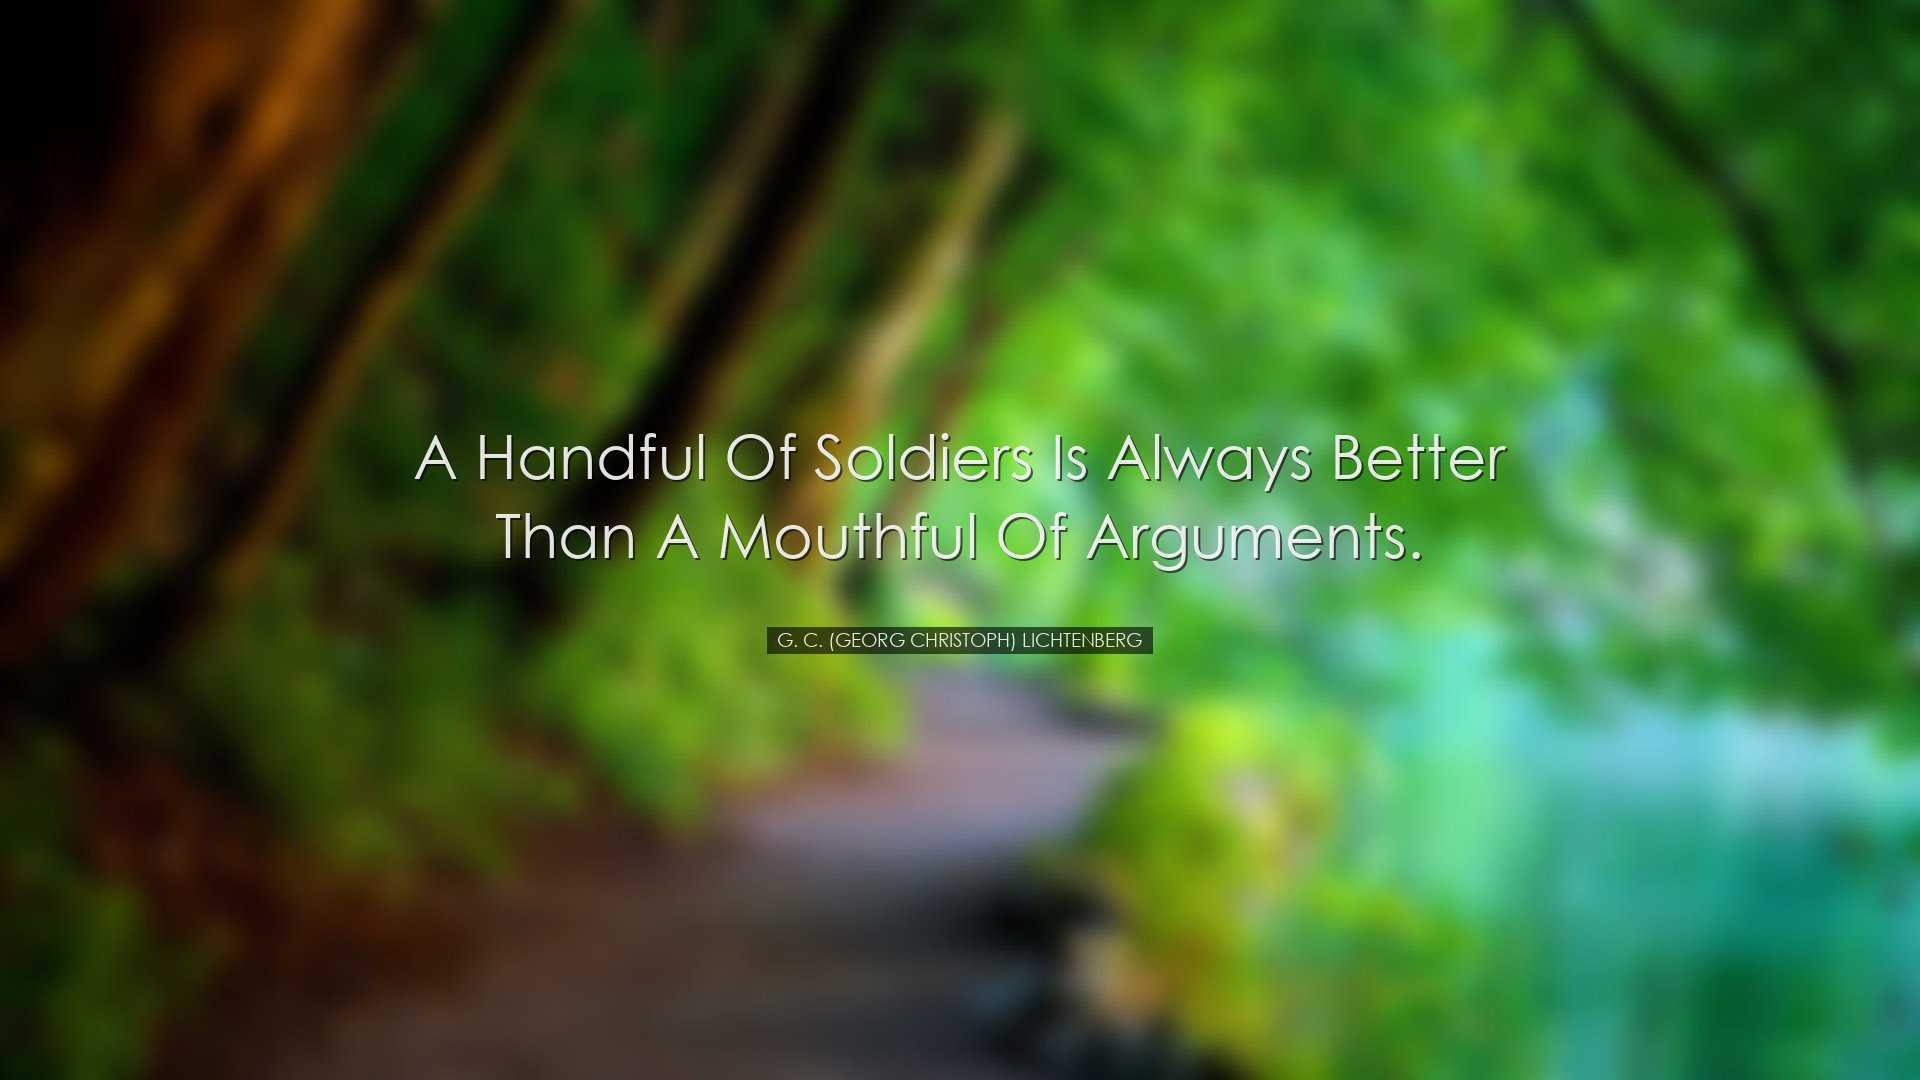 A handful of soldiers is always better than a mouthful of argument